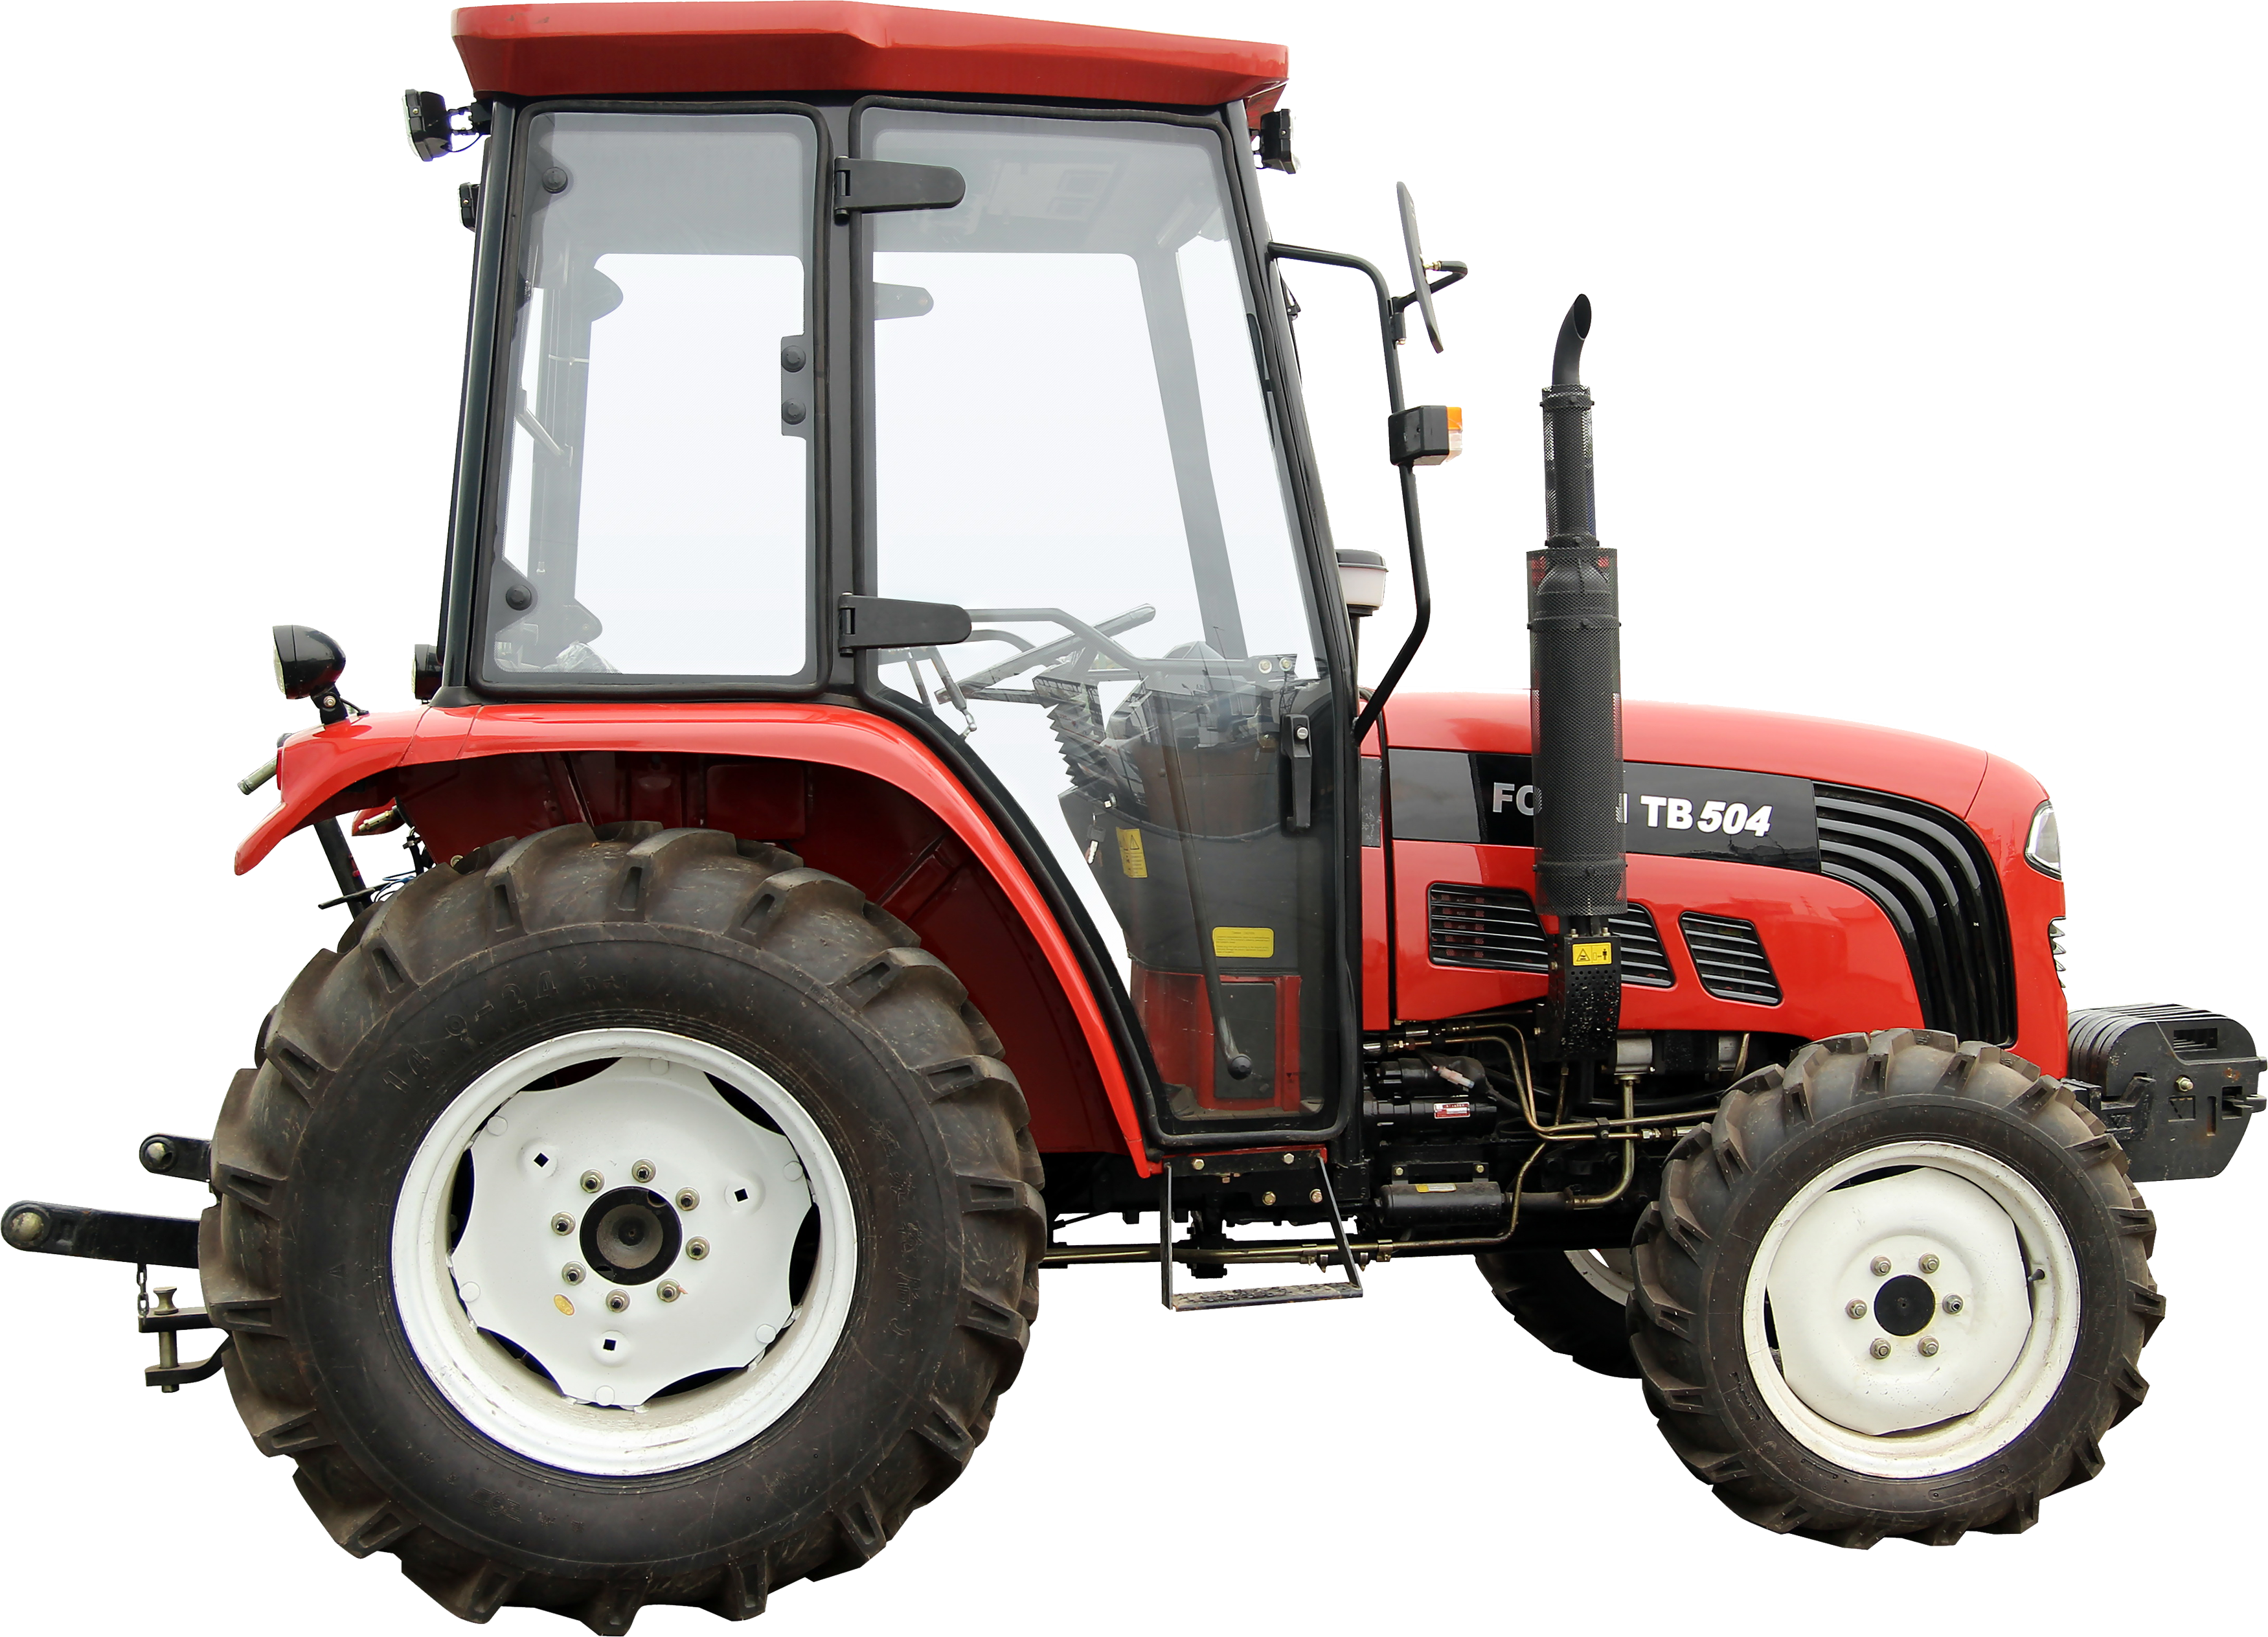 Tractor Png - Tractor, Transparent background PNG HD thumbnail